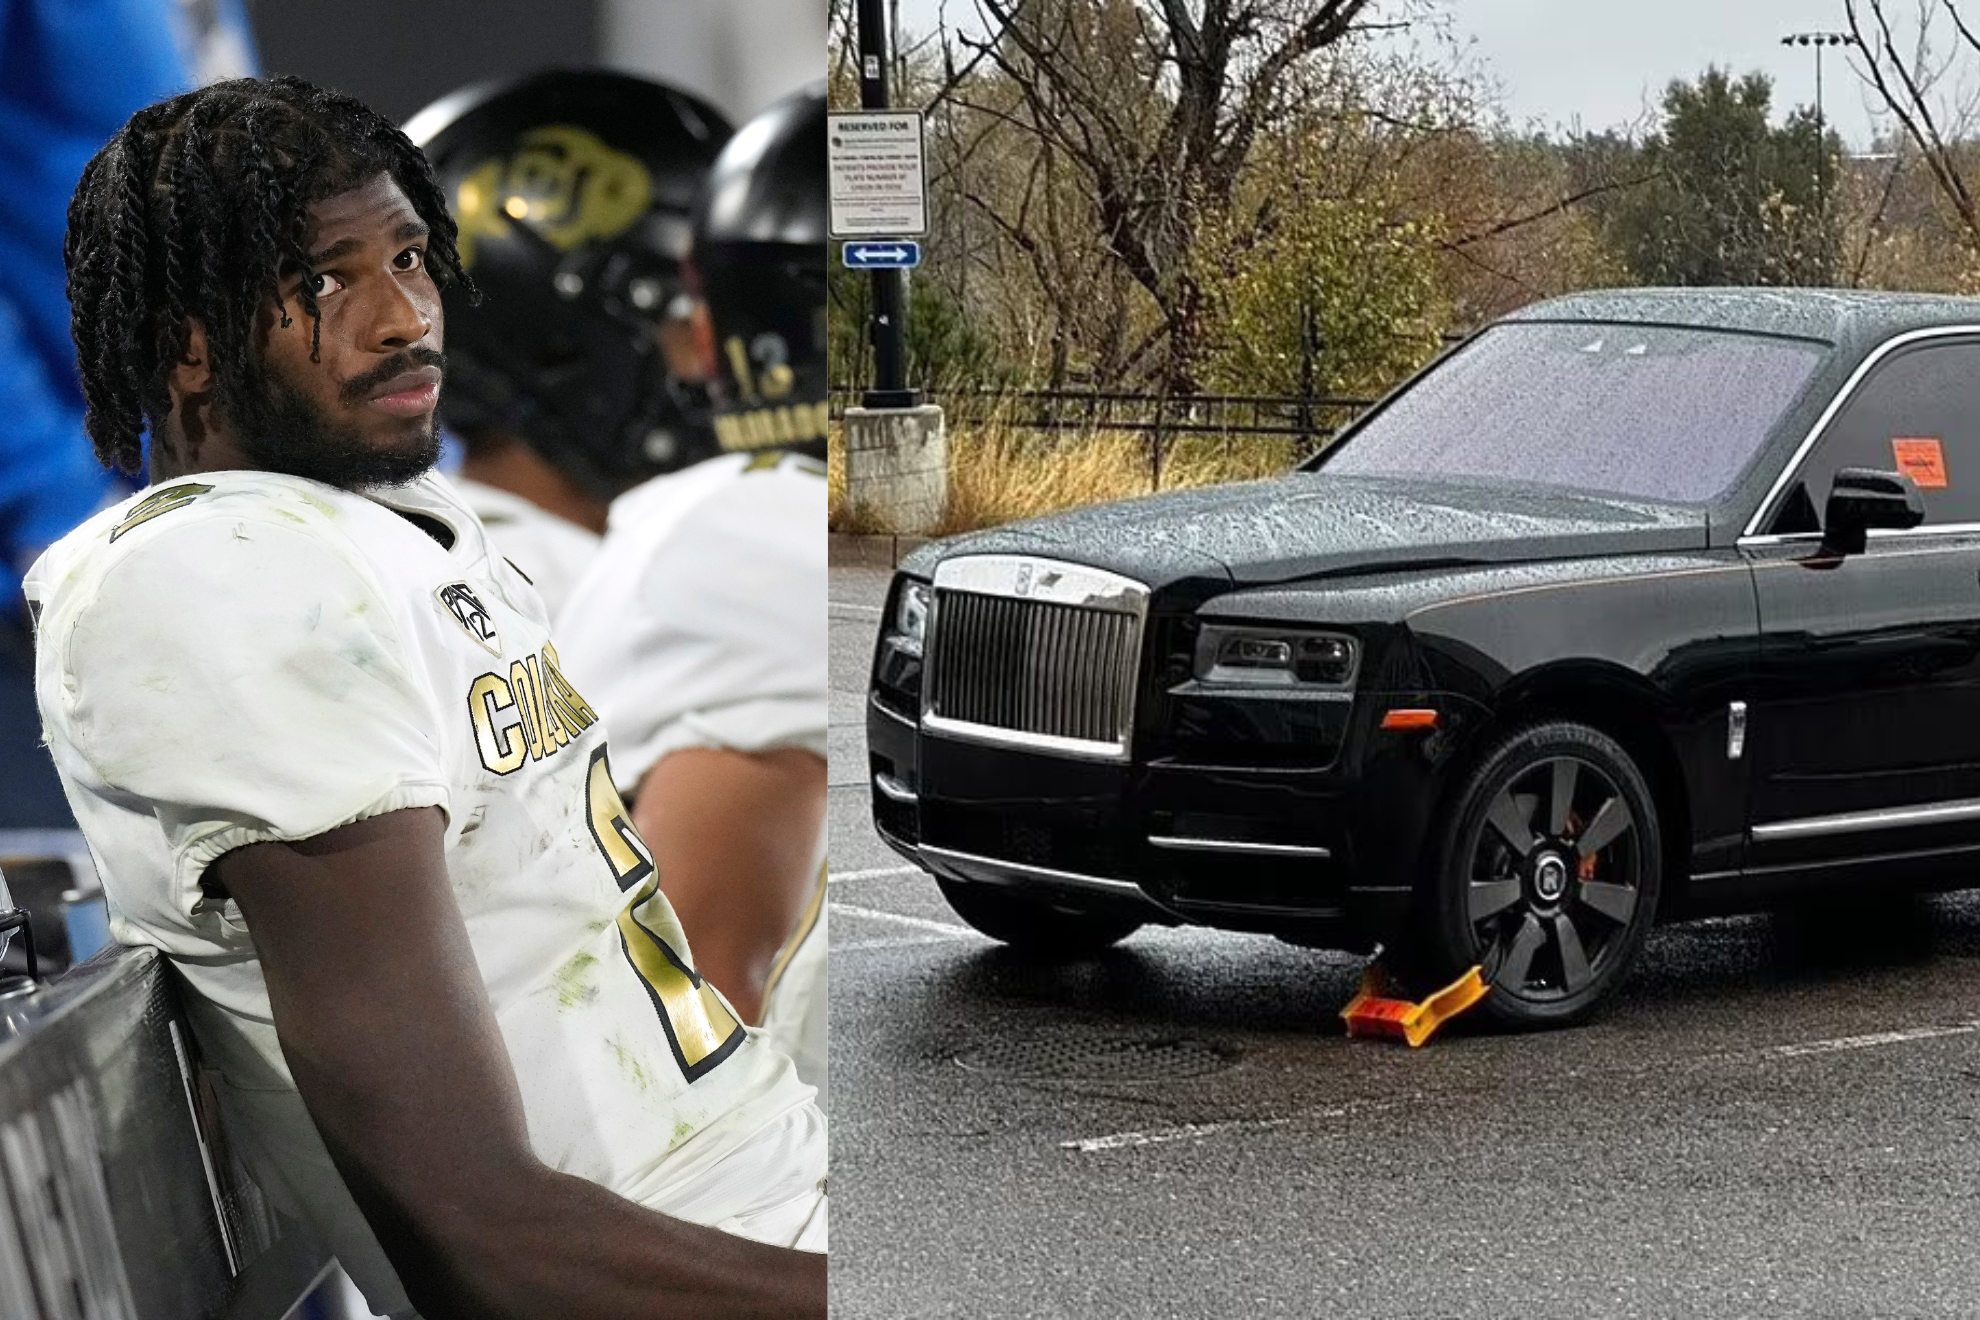 Shedeur Sanders and his booted car.